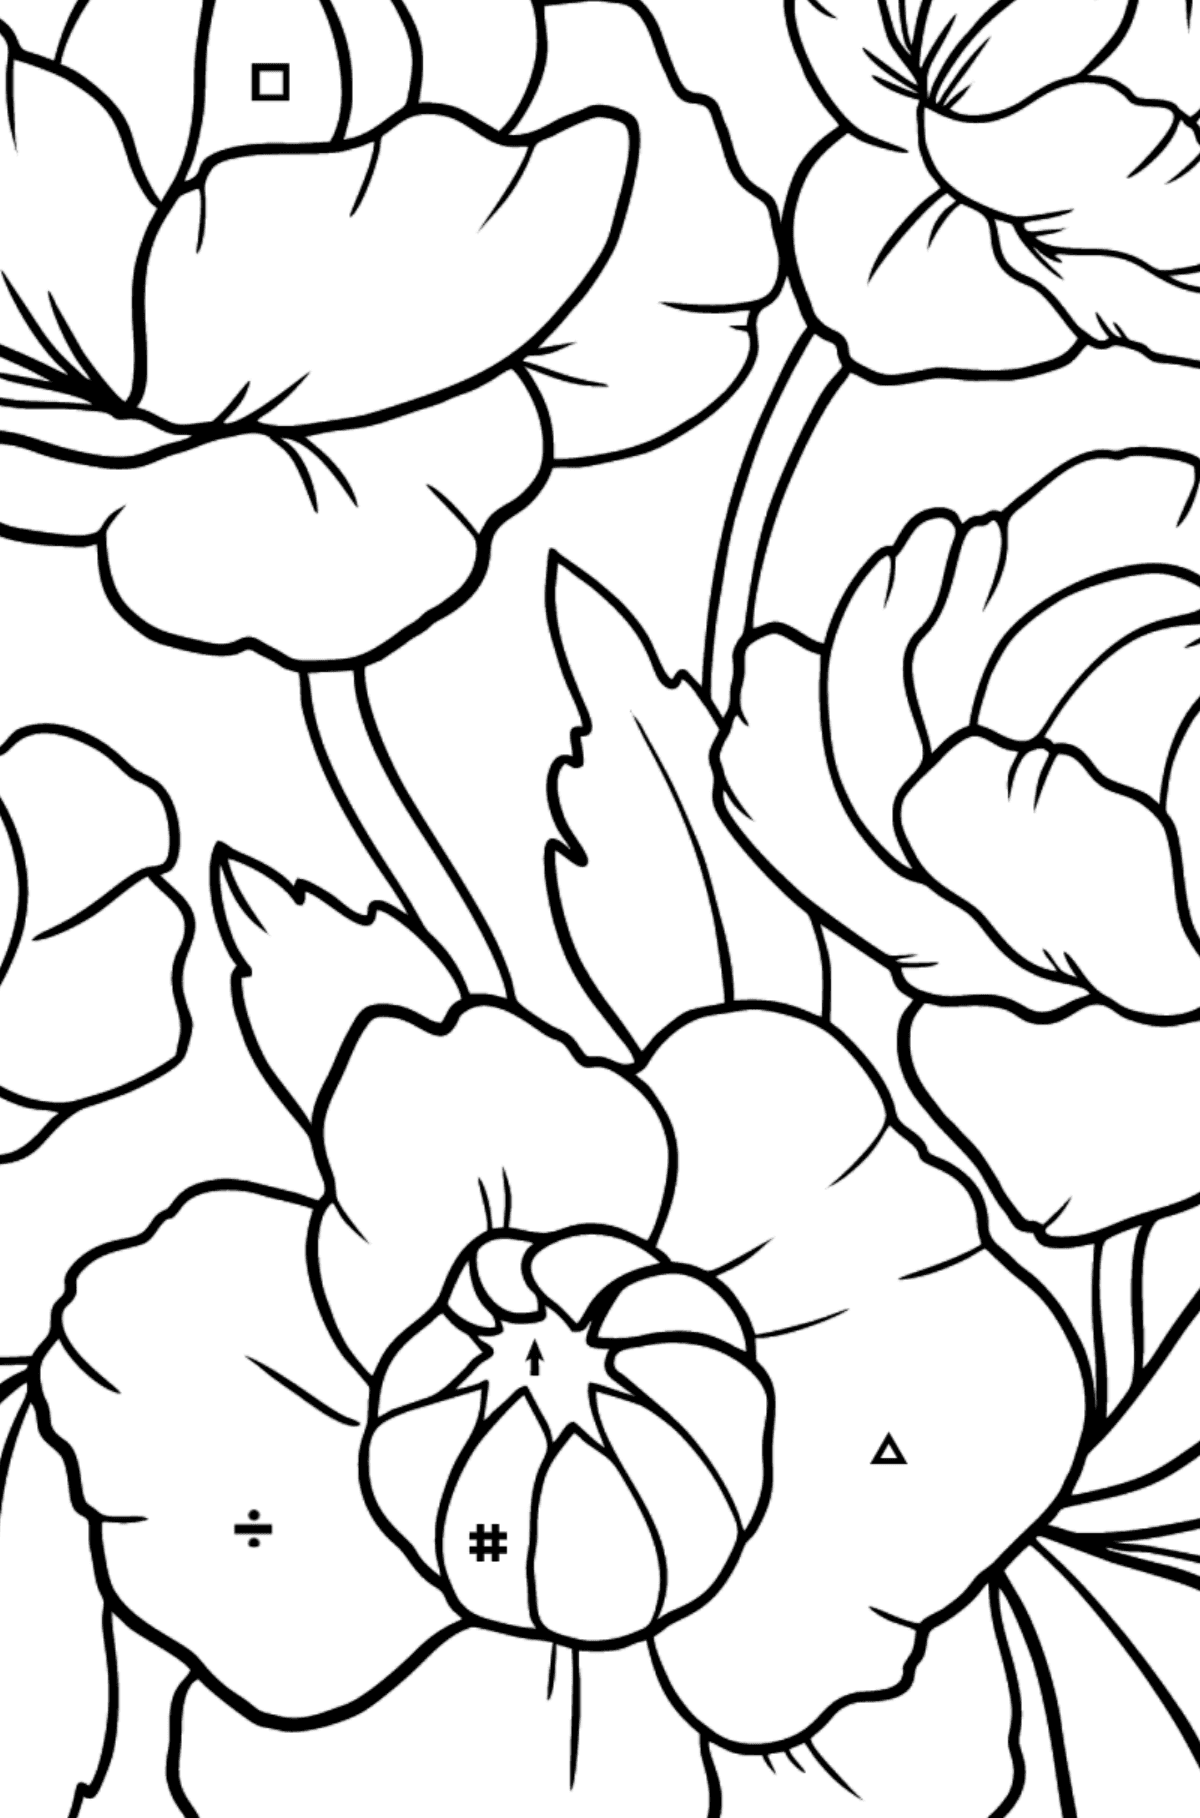 Beautiful Flower Coloring Page - A Red and Pink Globeflower - Coloring by Symbols for Kids